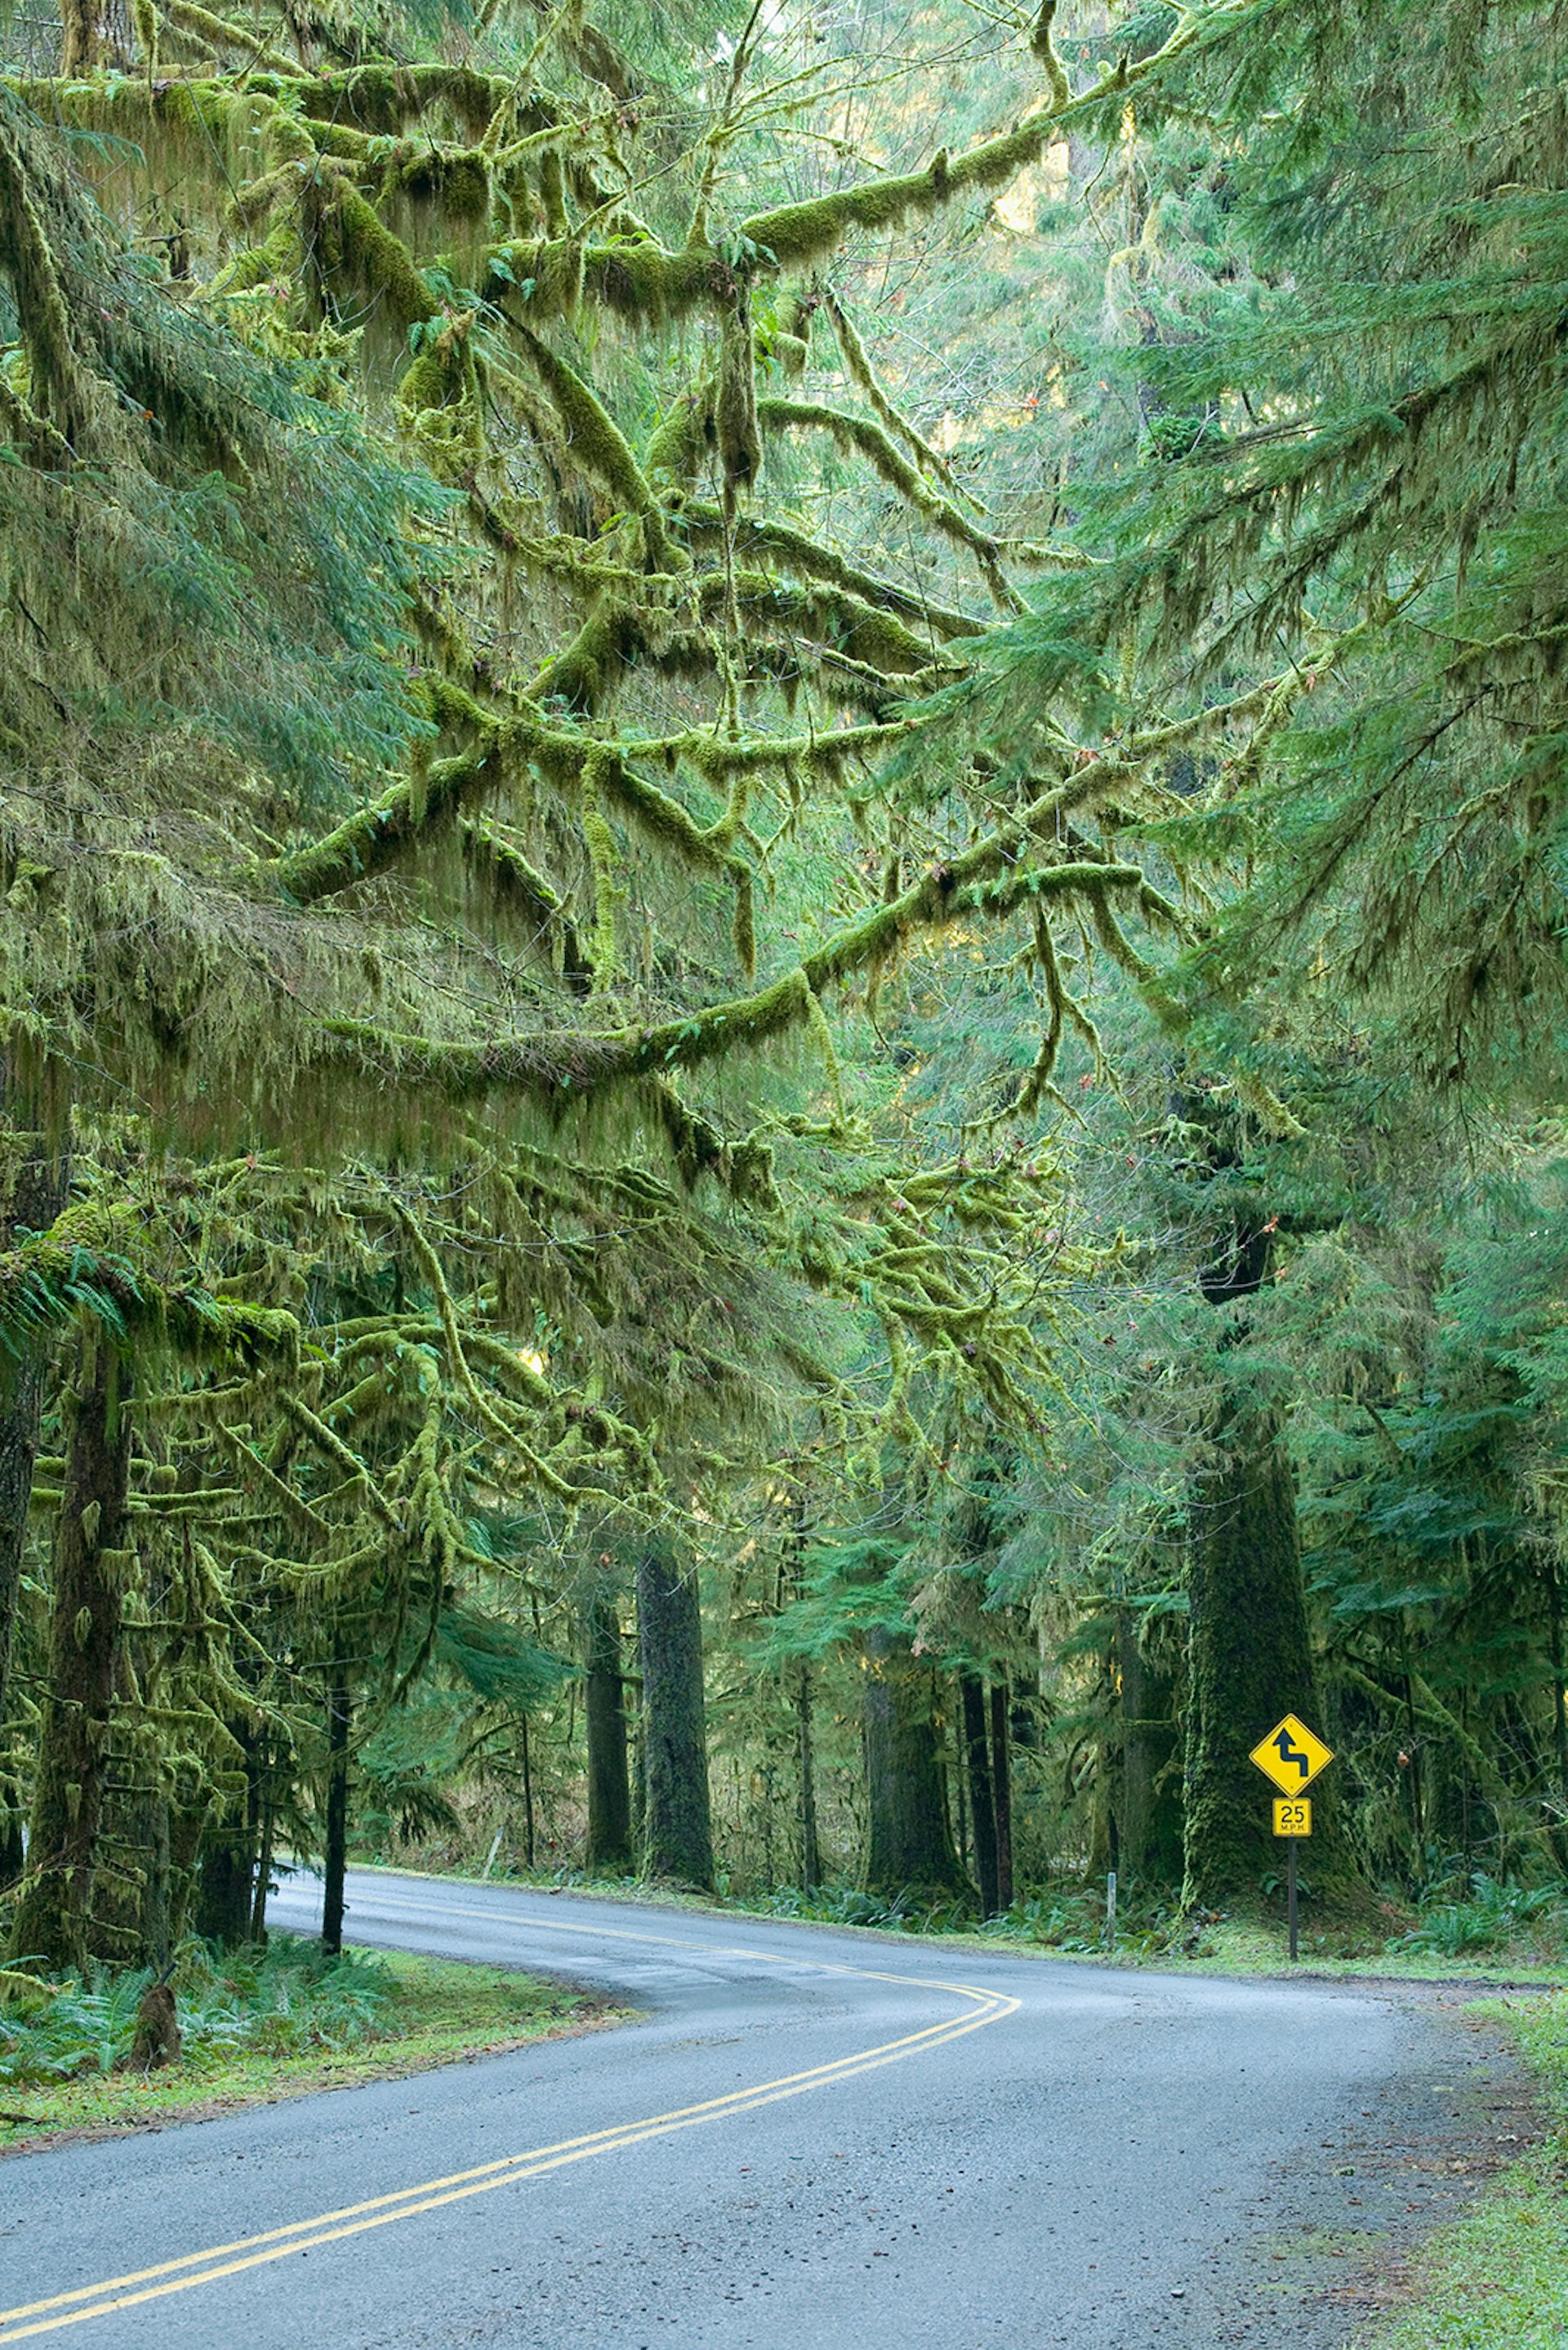 Moss-fringed tree branches over a winding road.